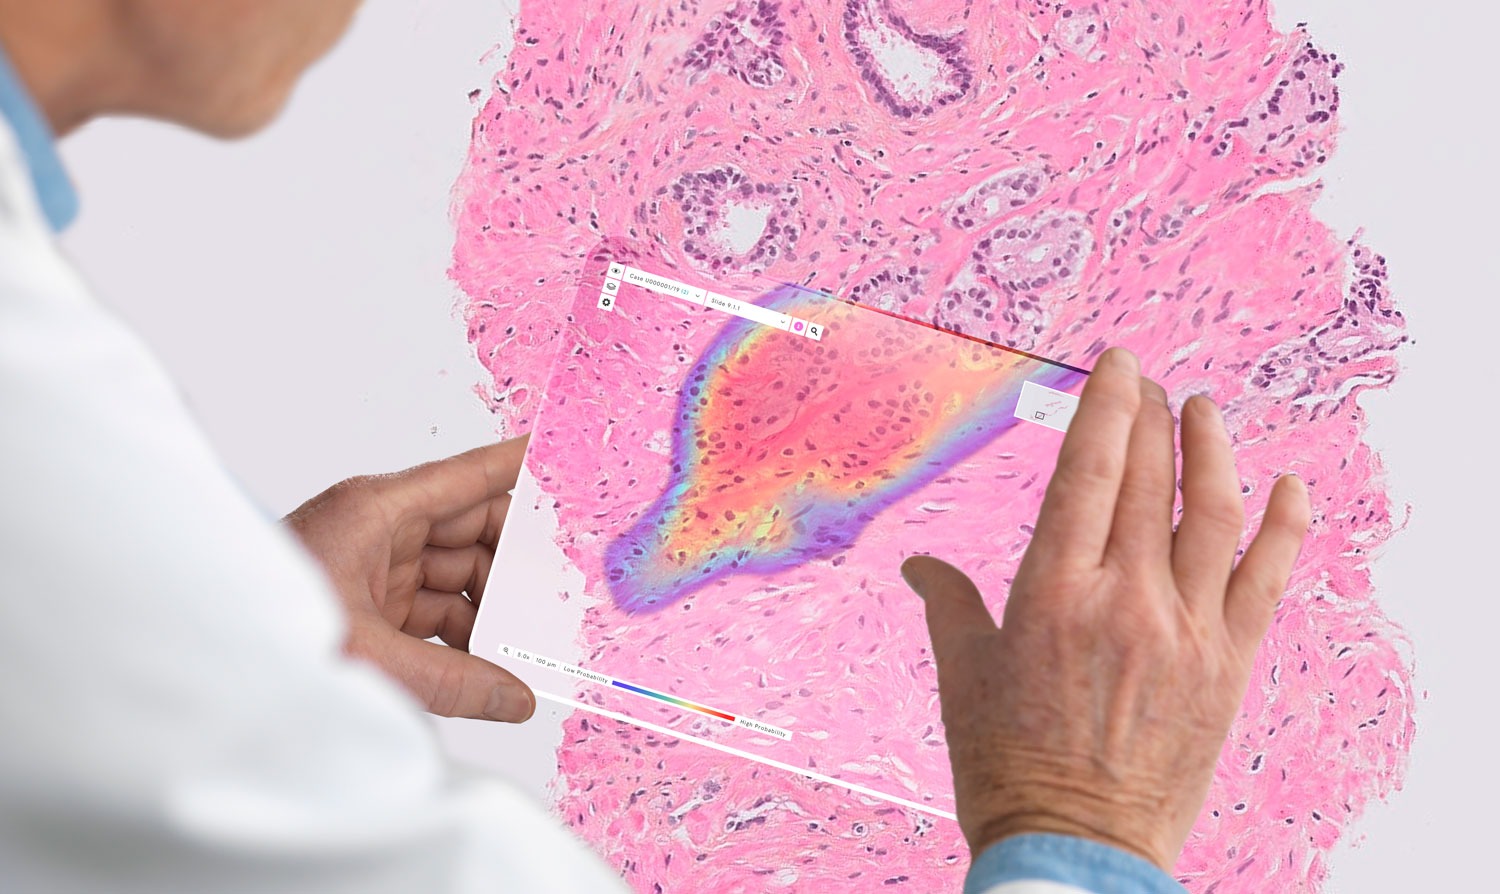 HLTH21: Roche, Ibex Medical Partner to Develop AI-Powered Digital Pathology Apps